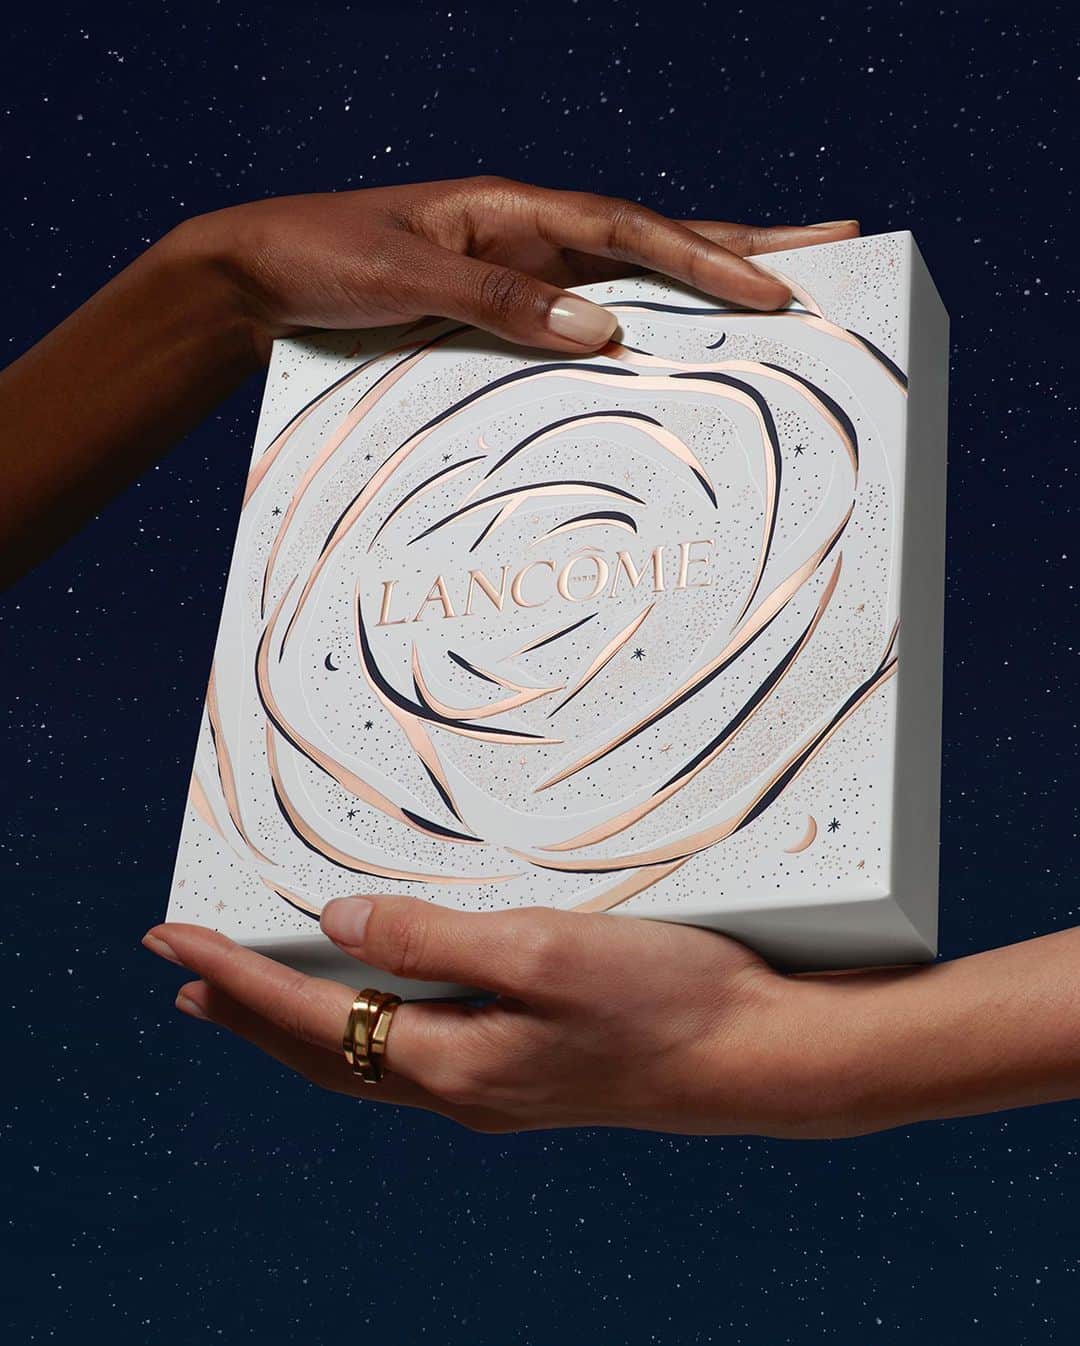 Lancôme Officialのインスタグラム：「Lancôme’s sublime gift experience starts from the beautifully-decorated limited-edition box. Powerful, modern and unique, it transports the receiver to the extraordinary Lancôme universe, concealing the most precious gift selections.  #Lancome #LancomexLouvre #Holiday23」